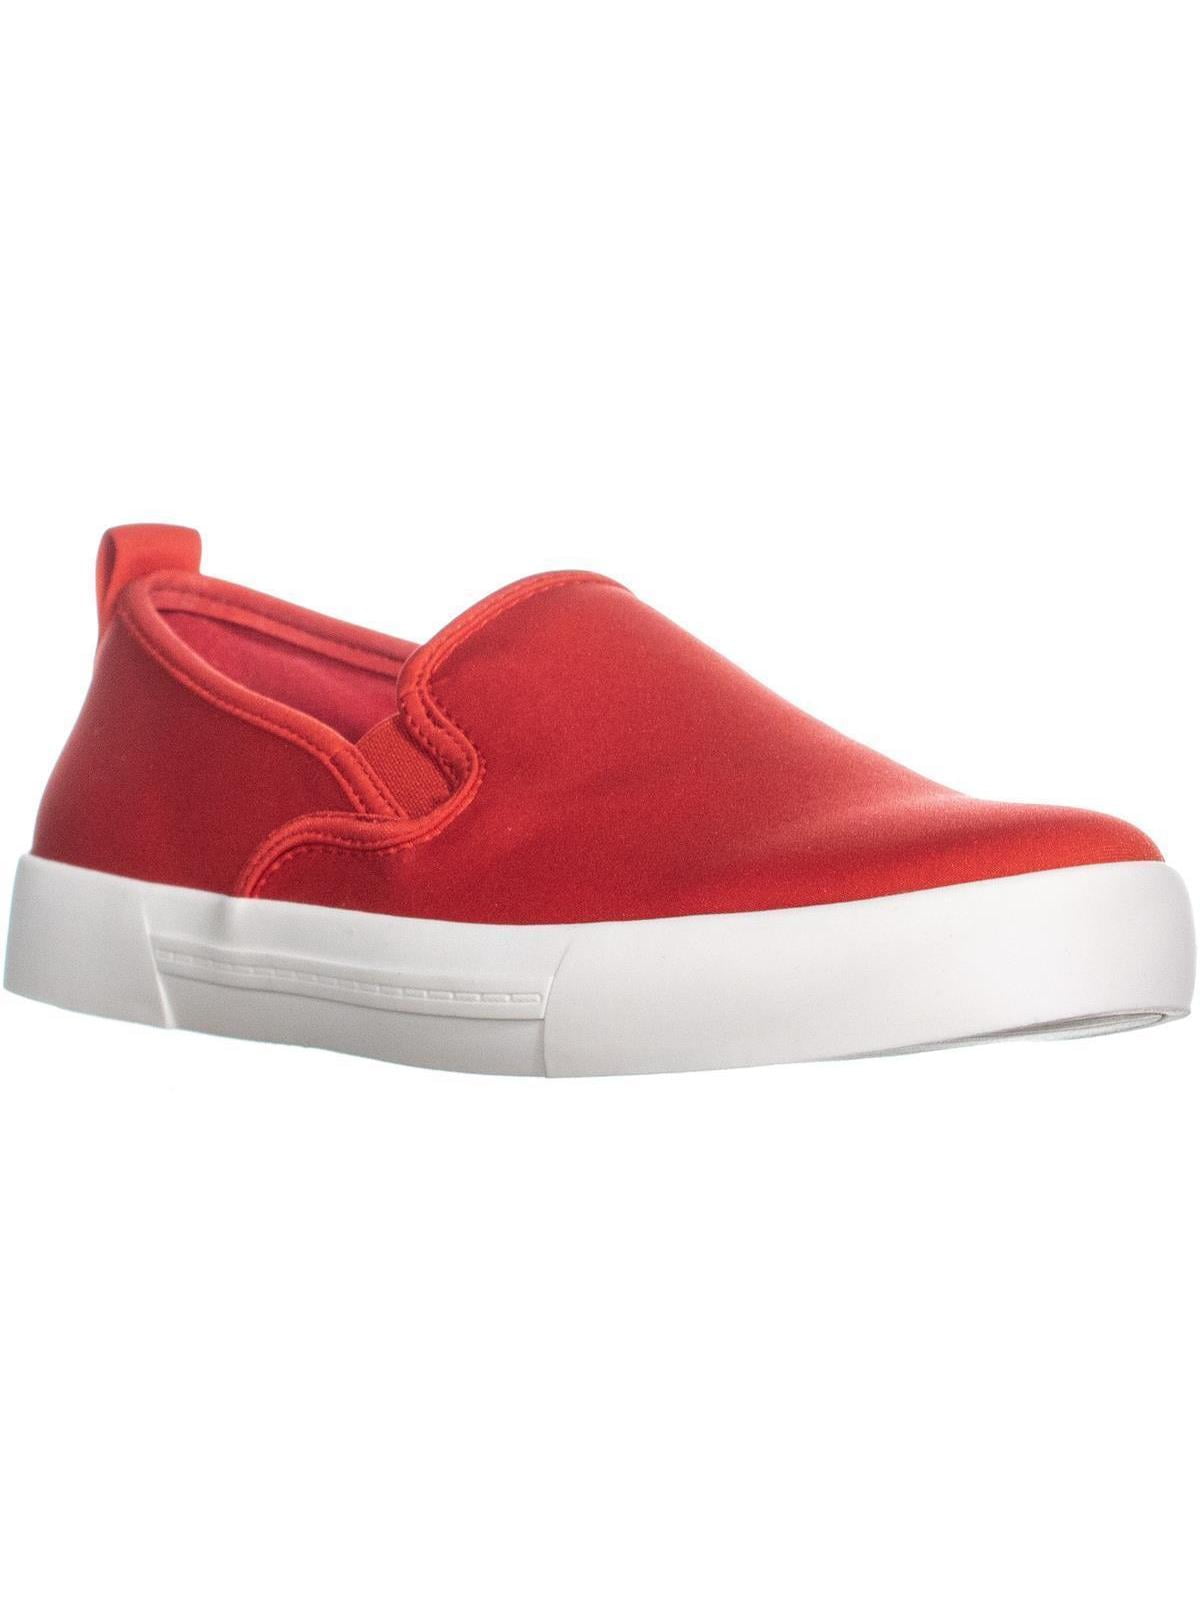 Womens Call It Spring Lovaudien Flat Fasion Sneakers, Red - Walmart.com